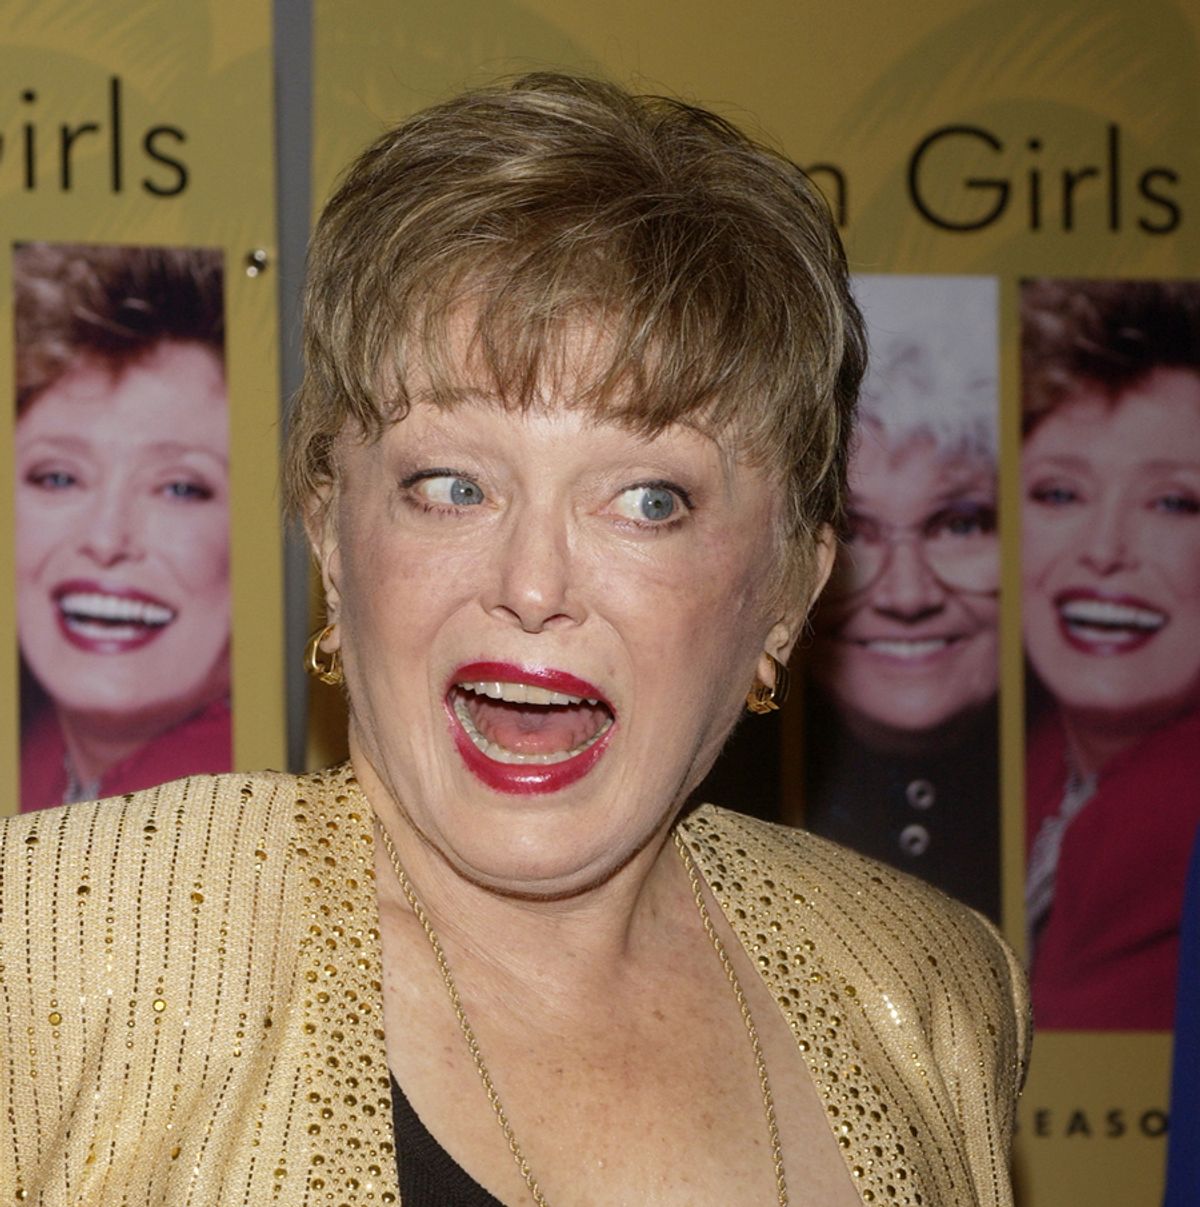 Rue McClanahan, a cast member in the 1980's television sitcom "The Golden Girls" speaks with a reporter during a party to celebrate the DVD release of "The Golden Girls: The Complete First Season" at The Museum of Television & Radio in Beverly Hills, California November 18, 2004. The three-disc set features 25 episodes from the series including the original pilot. REUTERS/Jim Ruymen  JR/TW  (Â© Reuters Photographer / Reuters)